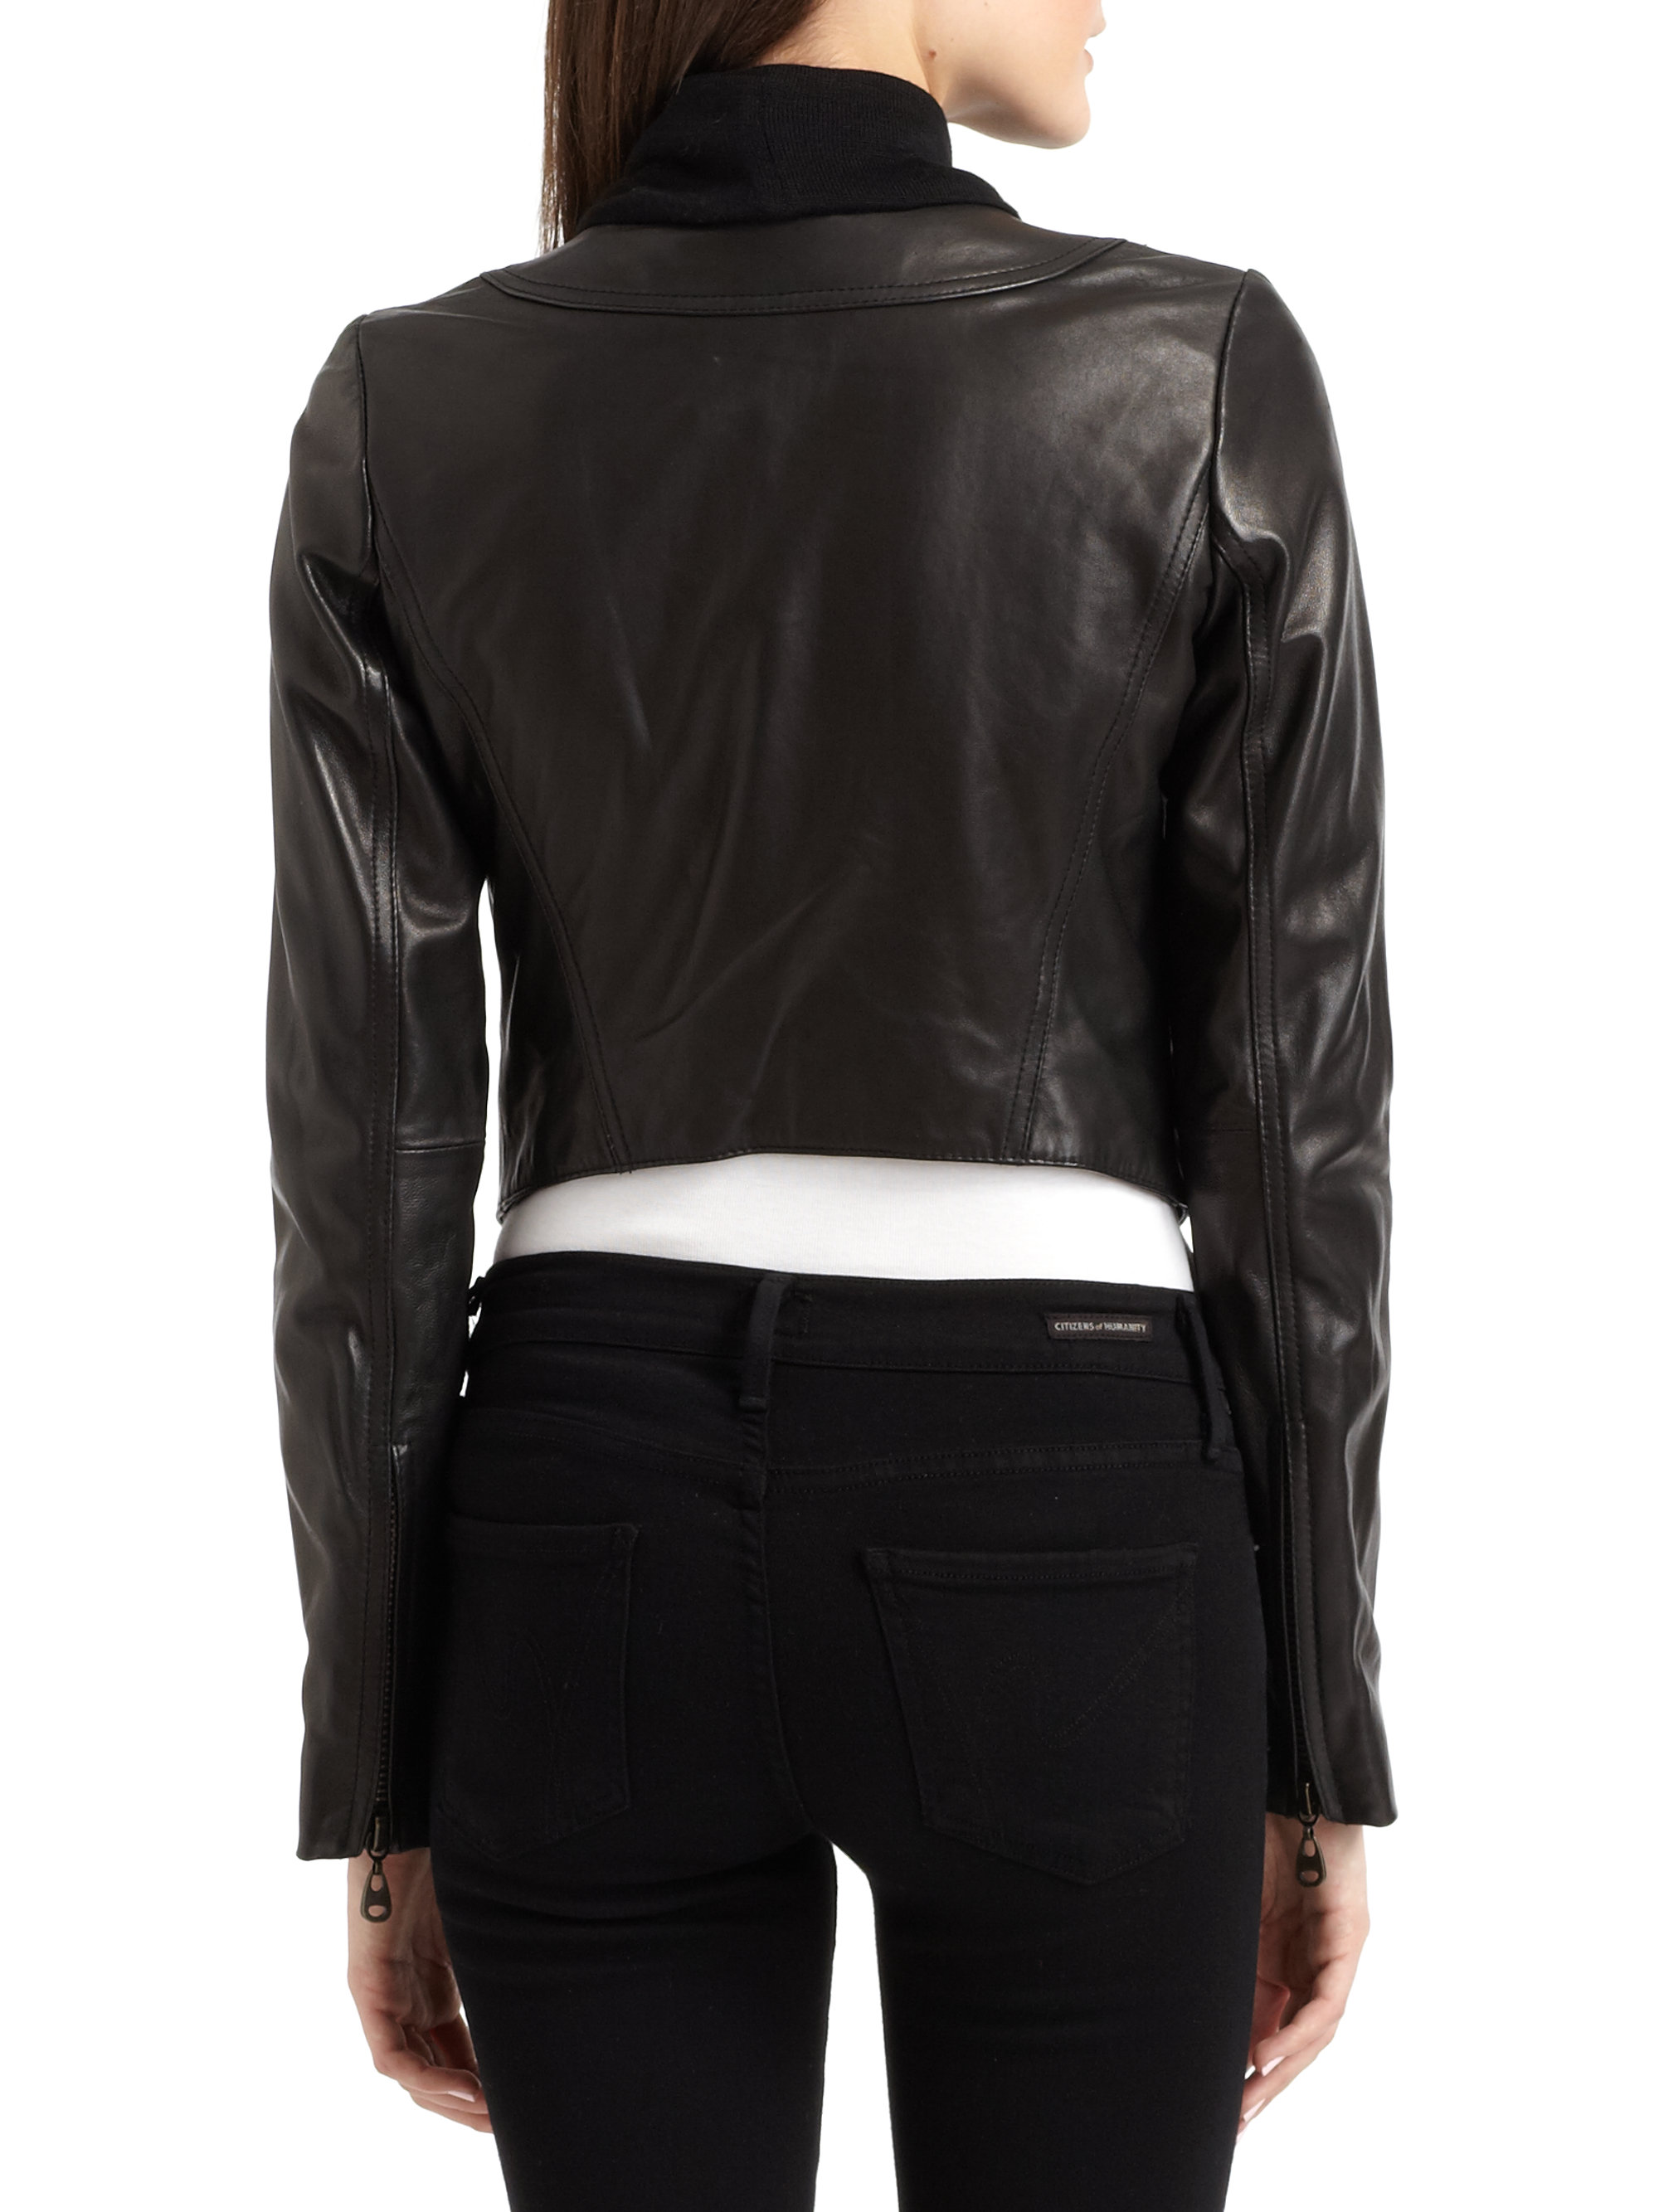 Lyst - Doma Leather Leather Jacket with Sweater Knit Scarf in Black